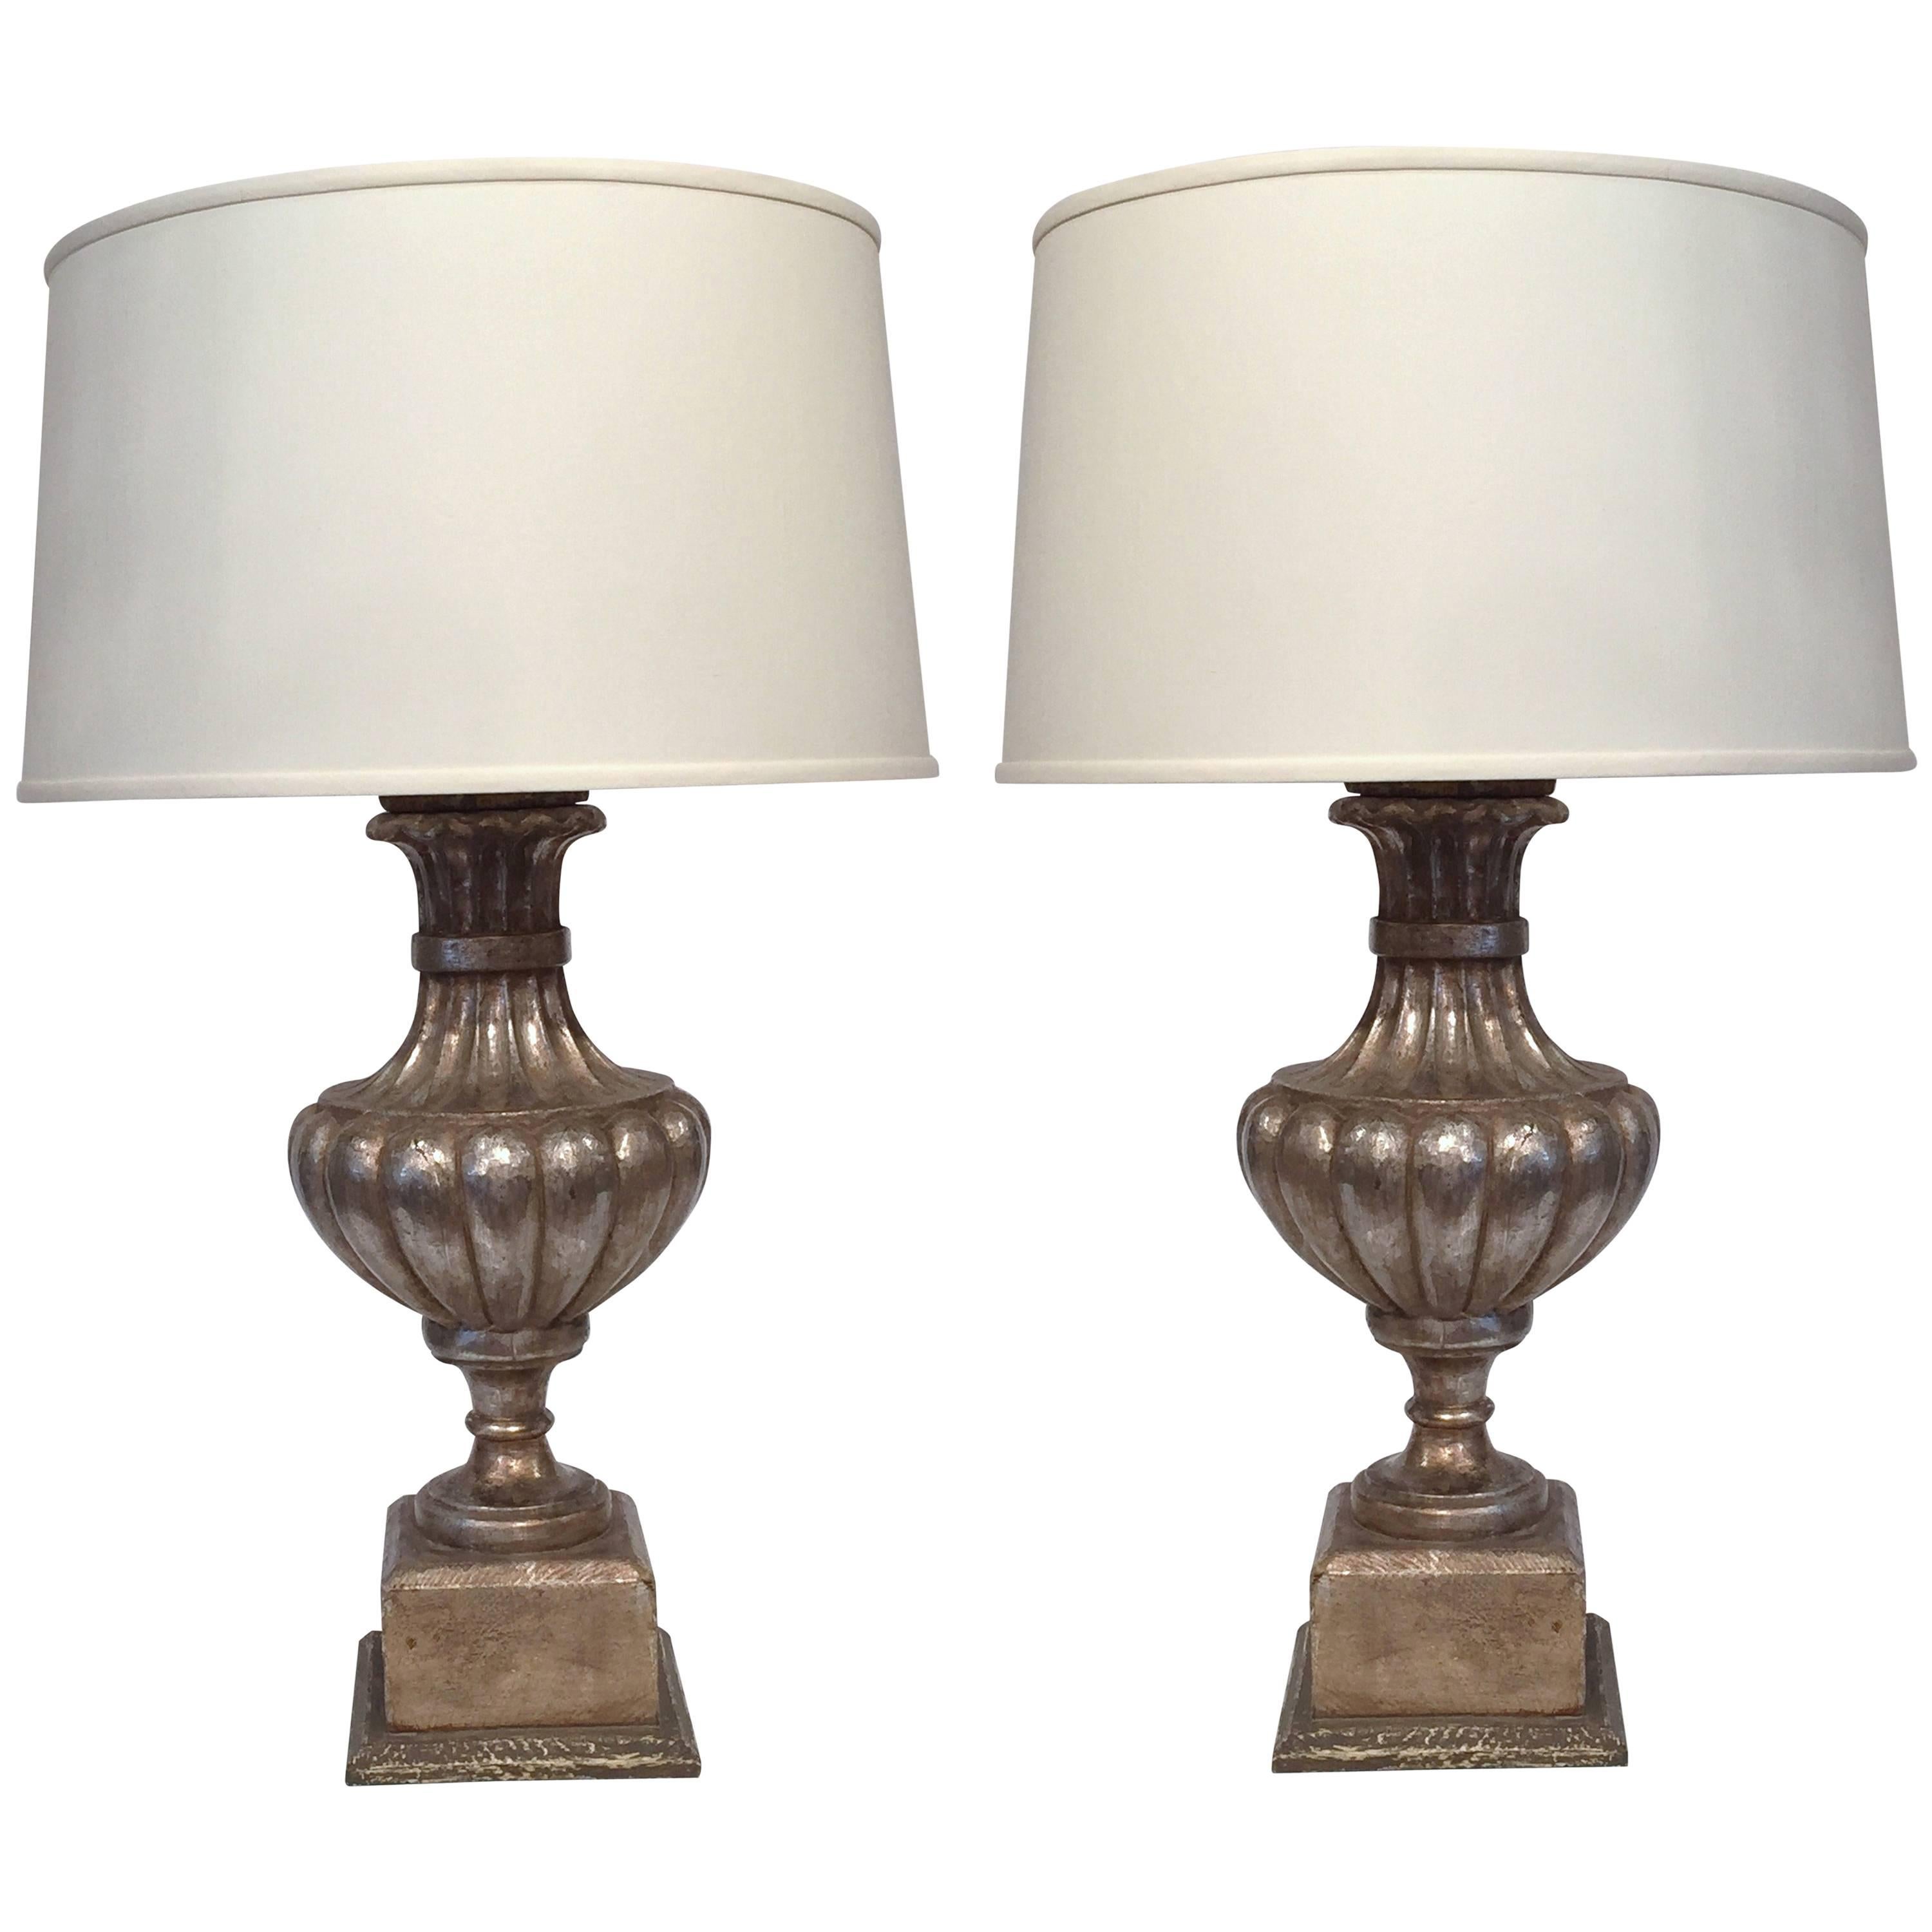 Pair of Italian Carved Lamp Bases with Silver Leaf Finish